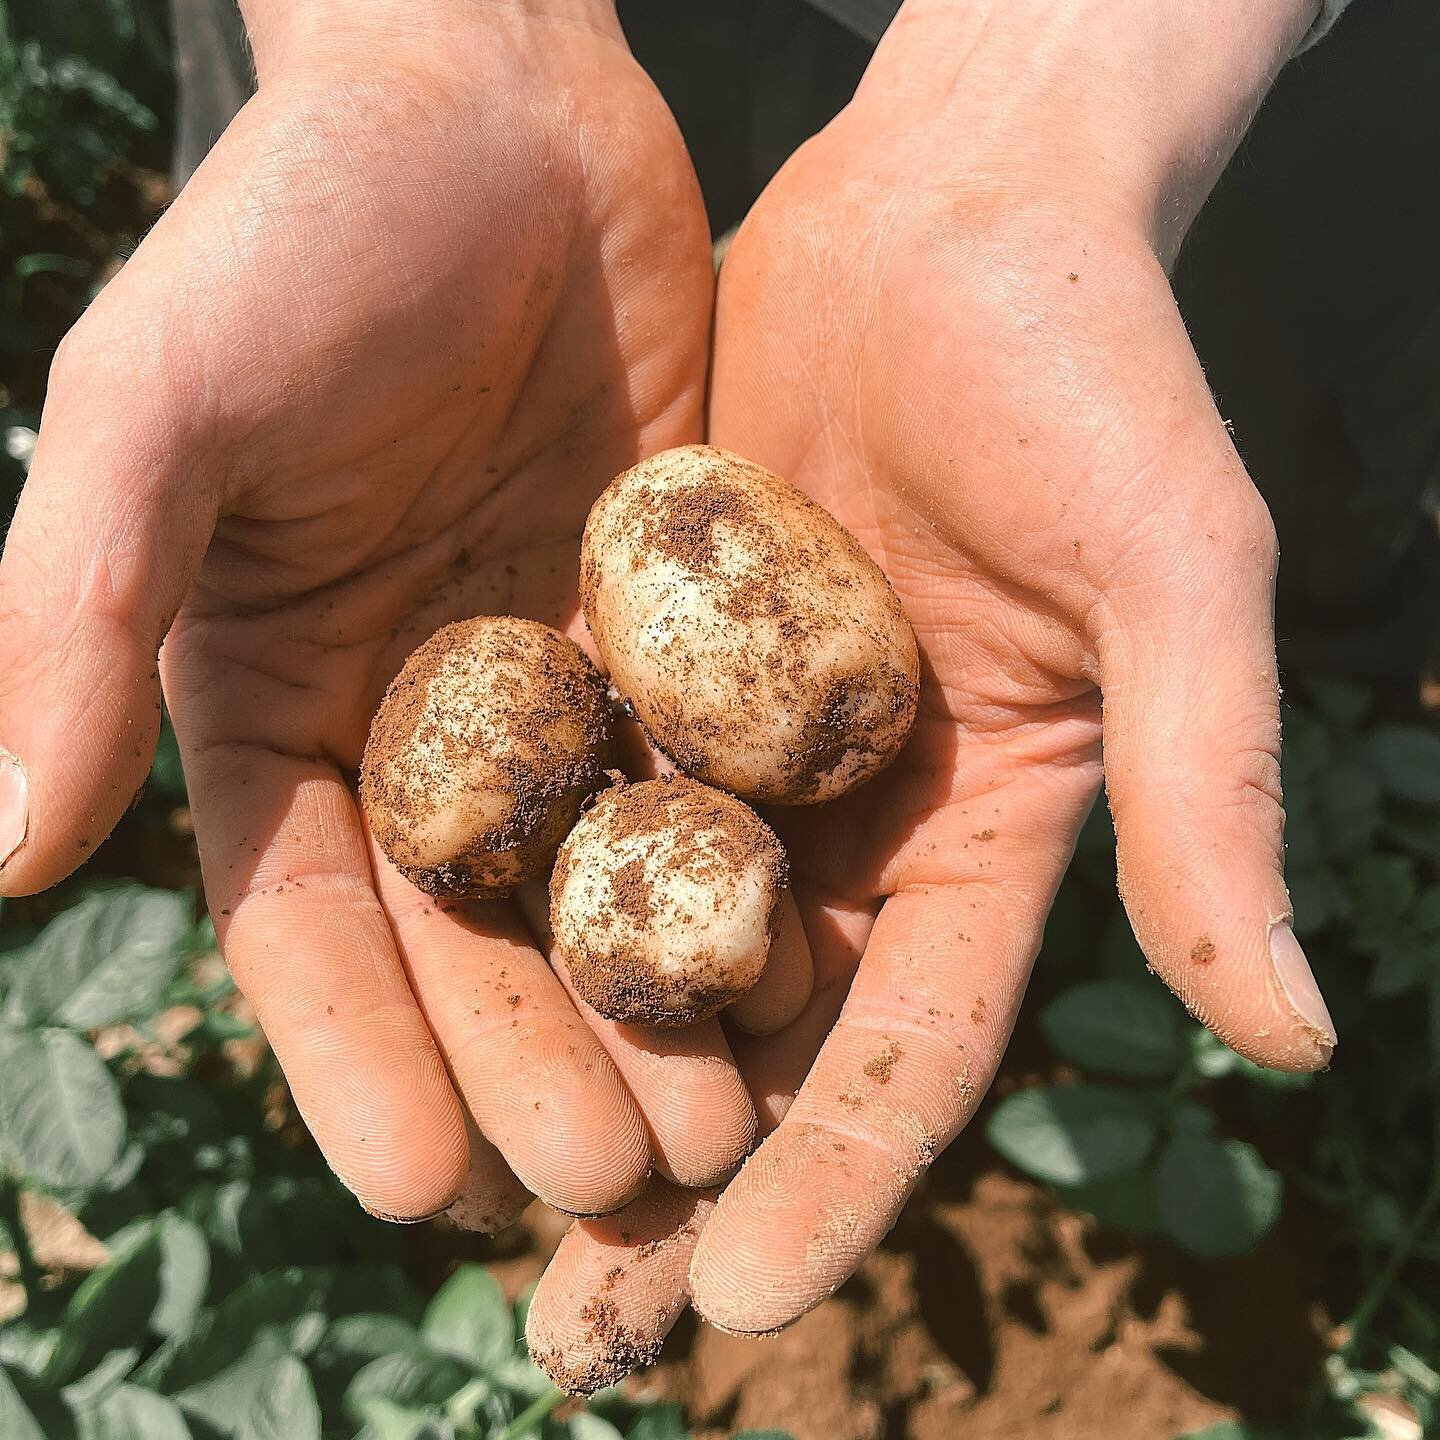 The countdown is on to HARVEST.

In two weeks we will be harvesting the first crop of Eco Spuds this season!

This is always the most exciting part of the year, where all the hard work of planting and tending to the potatoes comes to life.